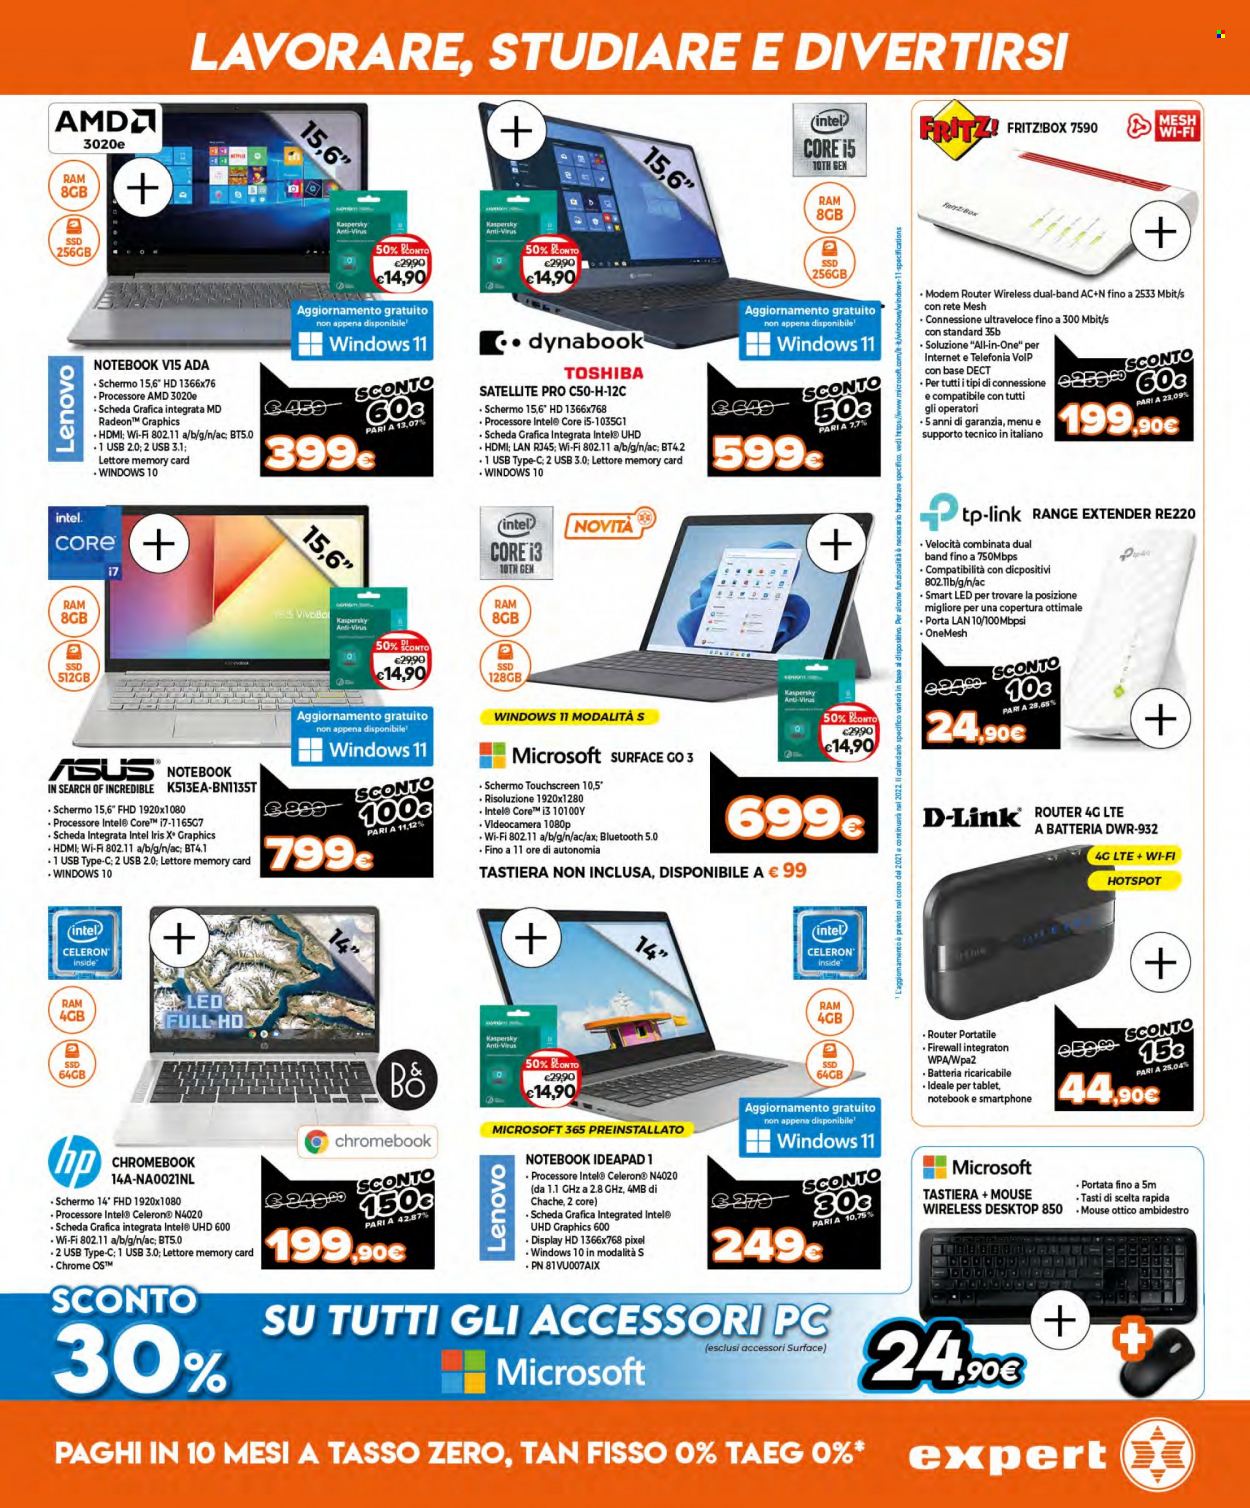 thumbnail - Volantino Expert - 1/11/2021 - 14/11/2021 - Prodotti in offerta - Hewlett-Packard, Asus, Lenovo, tablet, notebook, router, Wi-Fi Extender, smartphone, Intel, Toshiba, TP-Link, mouse, mouse ottico, videocamera. Pagina 6.